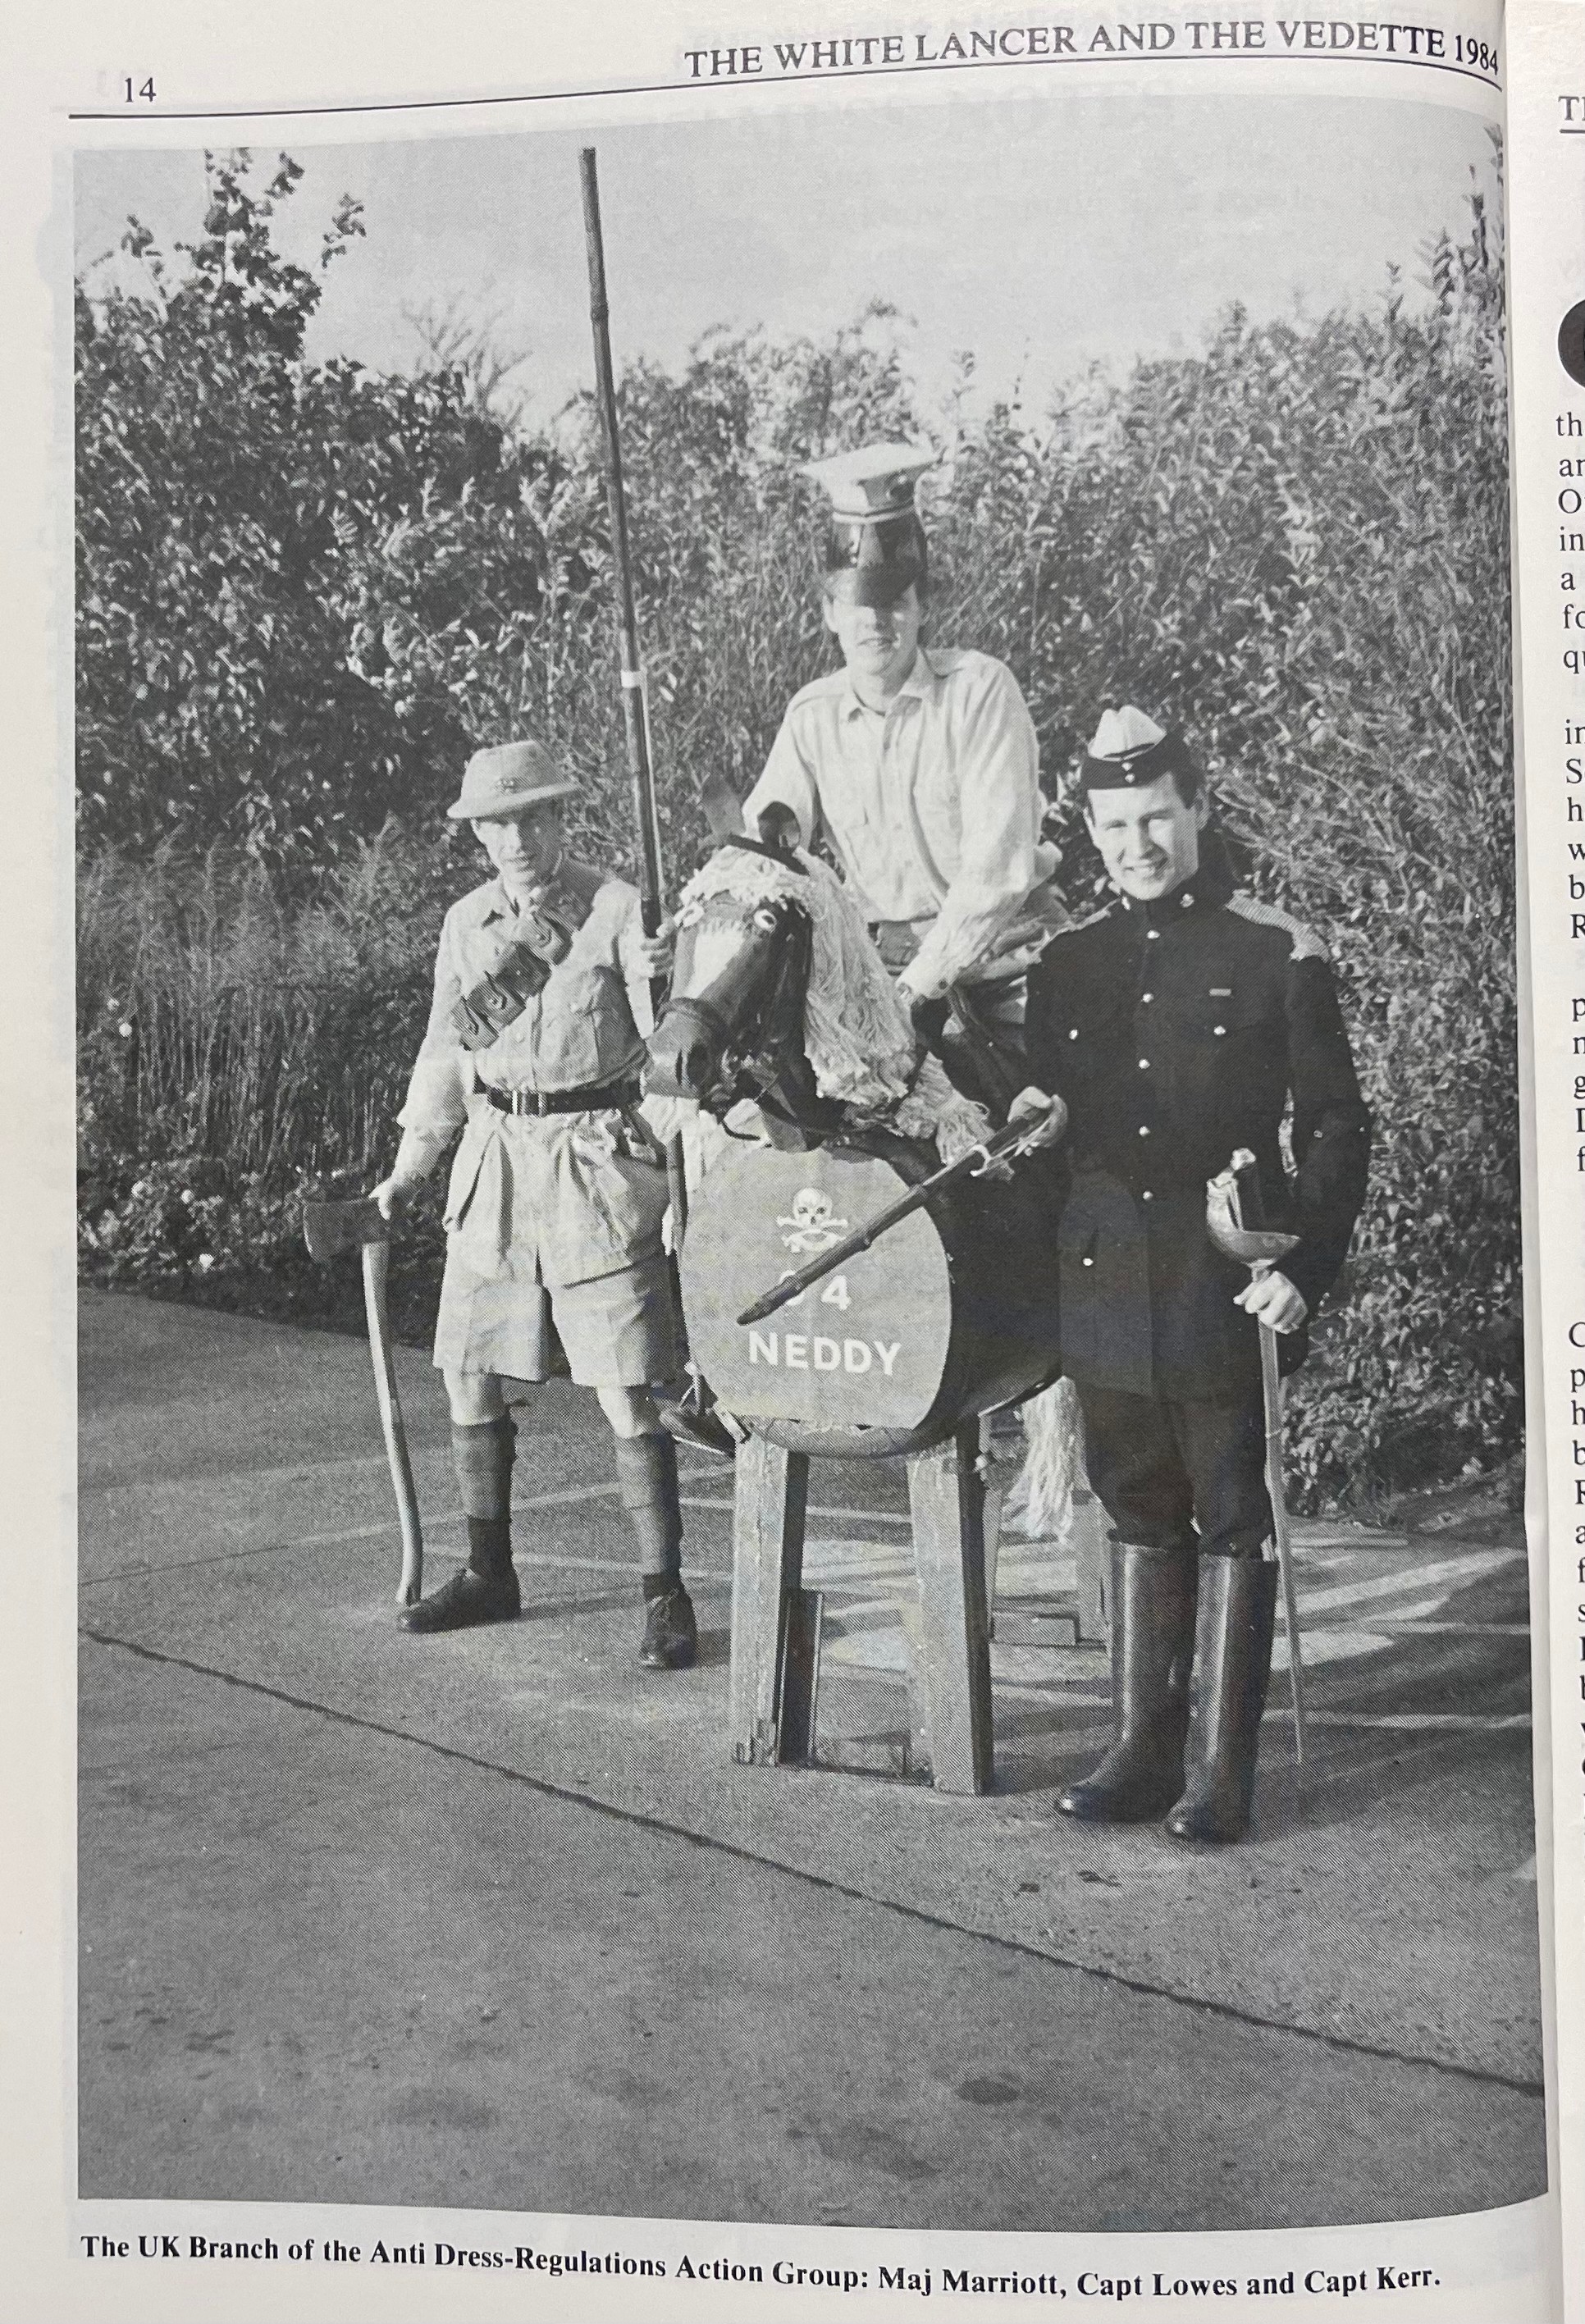 British 17th/21st Lancers Regimental Magazines, "The White Lancer and the Vedette", early post war - Image 7 of 7